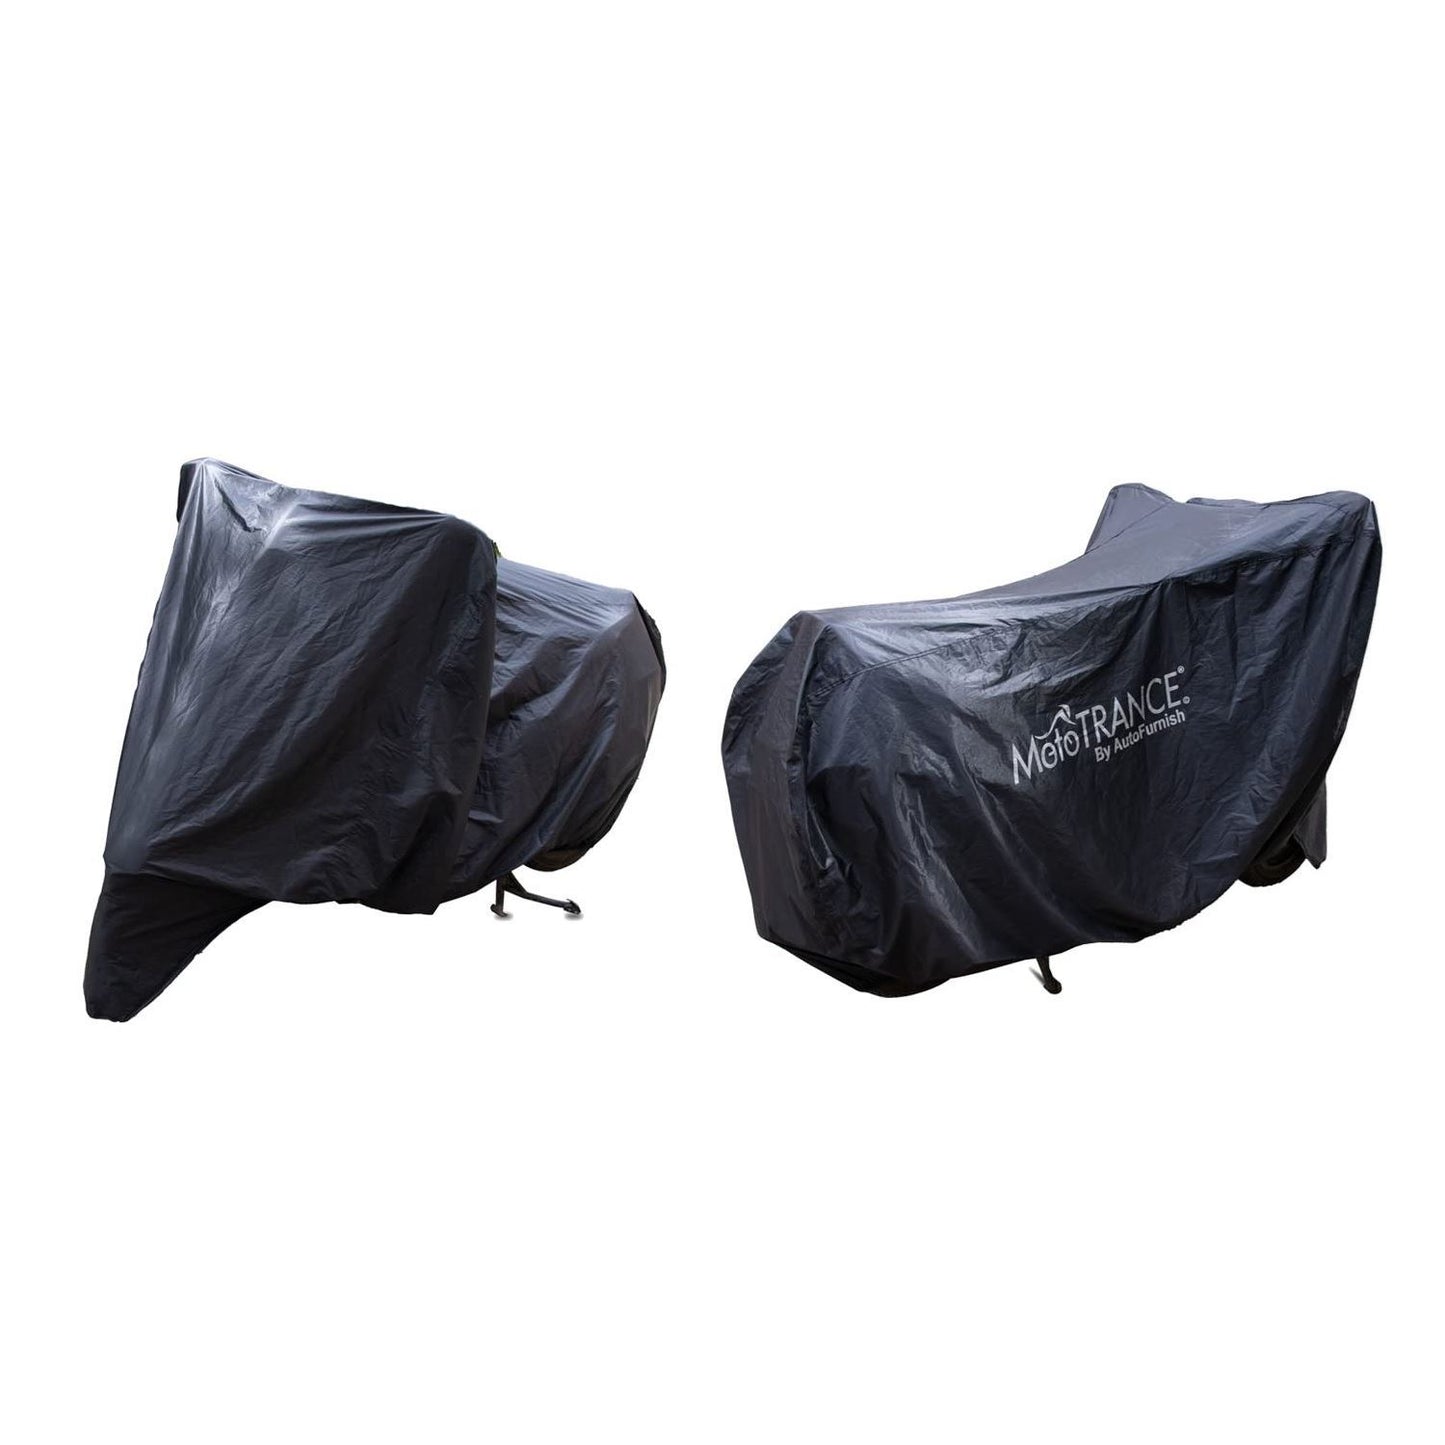 Mototrance Arid Black 100% Waterproof (Tested) Dustproof UV Protection Bike Body Cover for Scooty/Scooters/Bike upto Pulsar Size (upto 180 CC Bikes) with Integrated Carry Bag - Large Size (L)